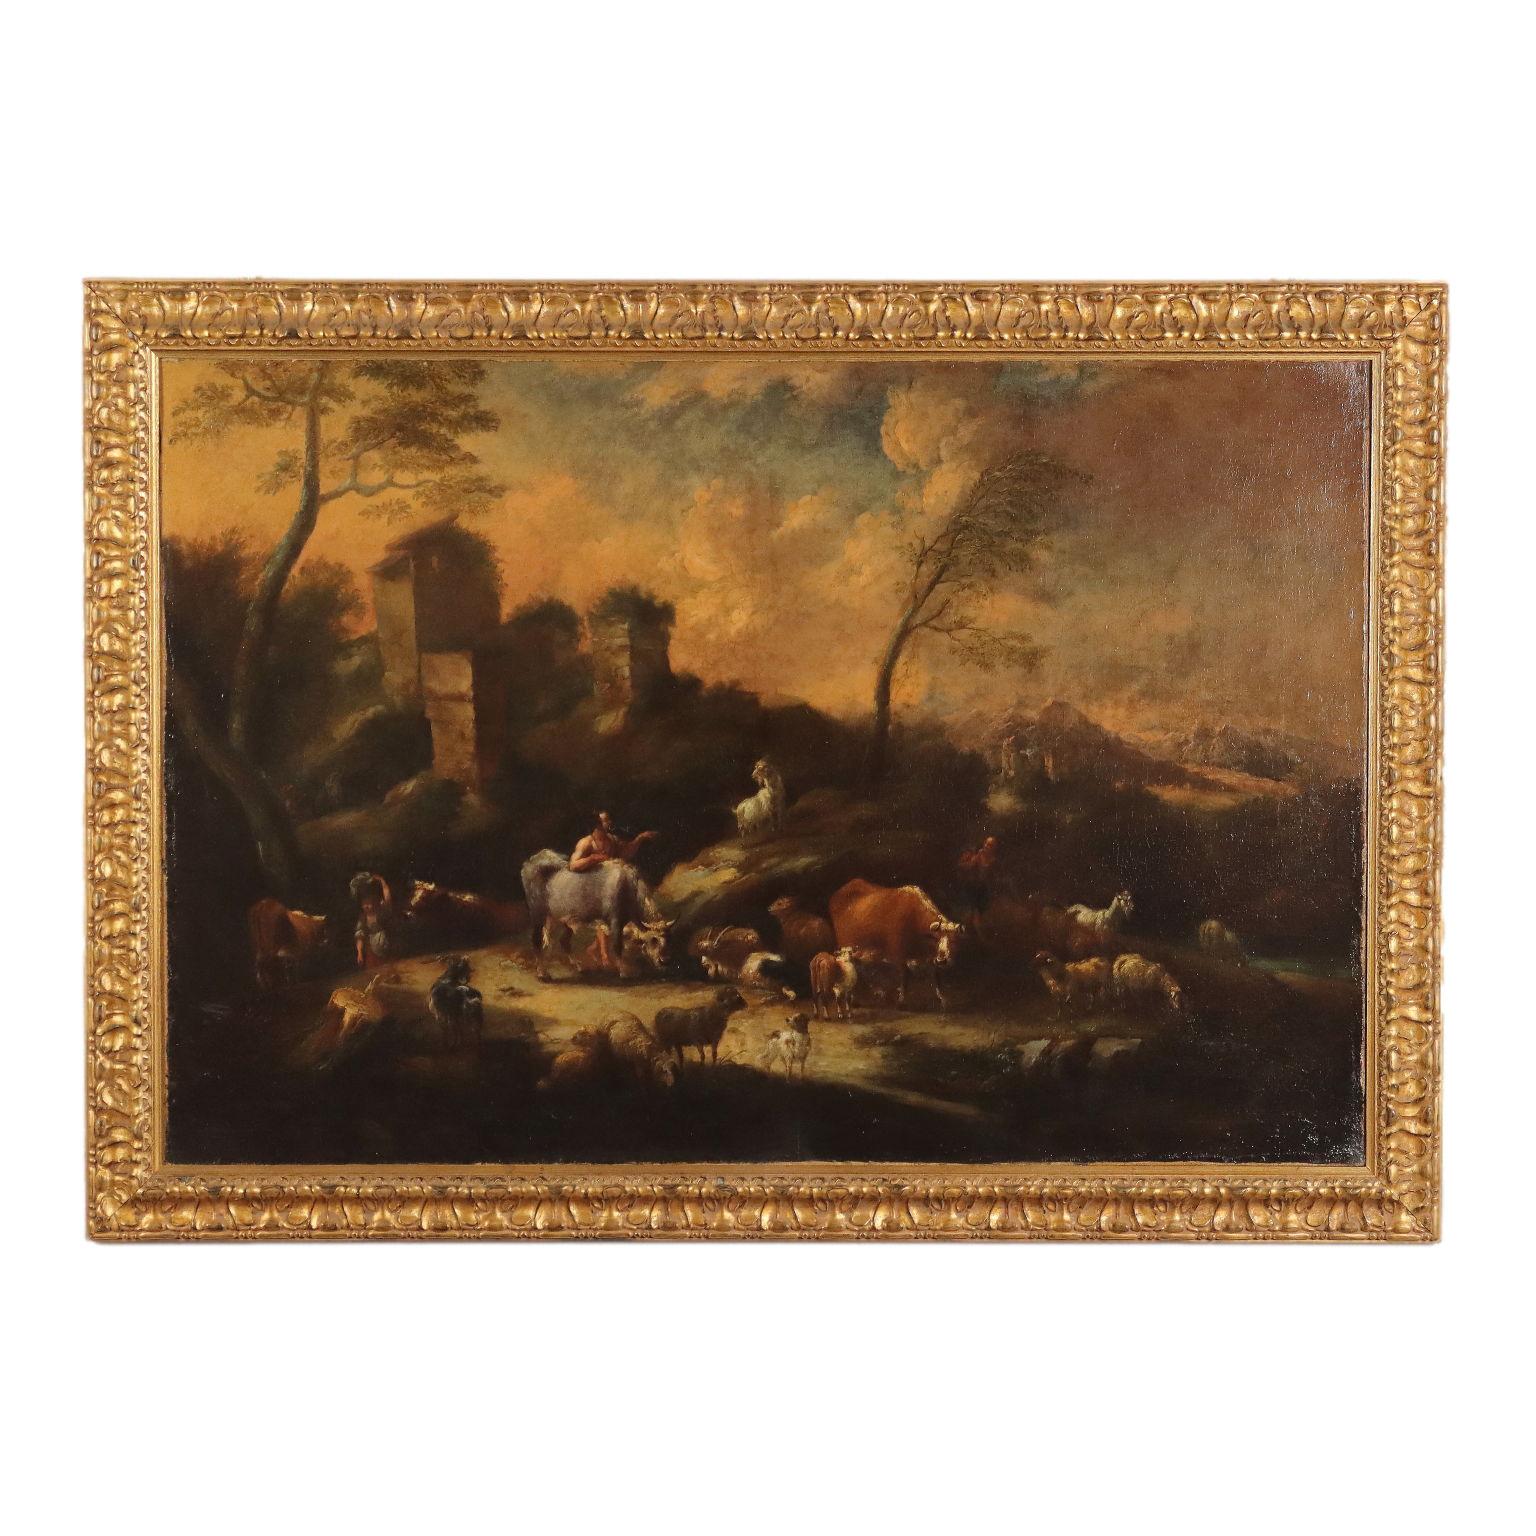 Oil painting on canvas. Italian school of the eighteenth century. Within a rather barren landscape, with architectural ruins on the left and snow-capped peaks in the background on the right, some shepherds pass along the path, leading their flocks